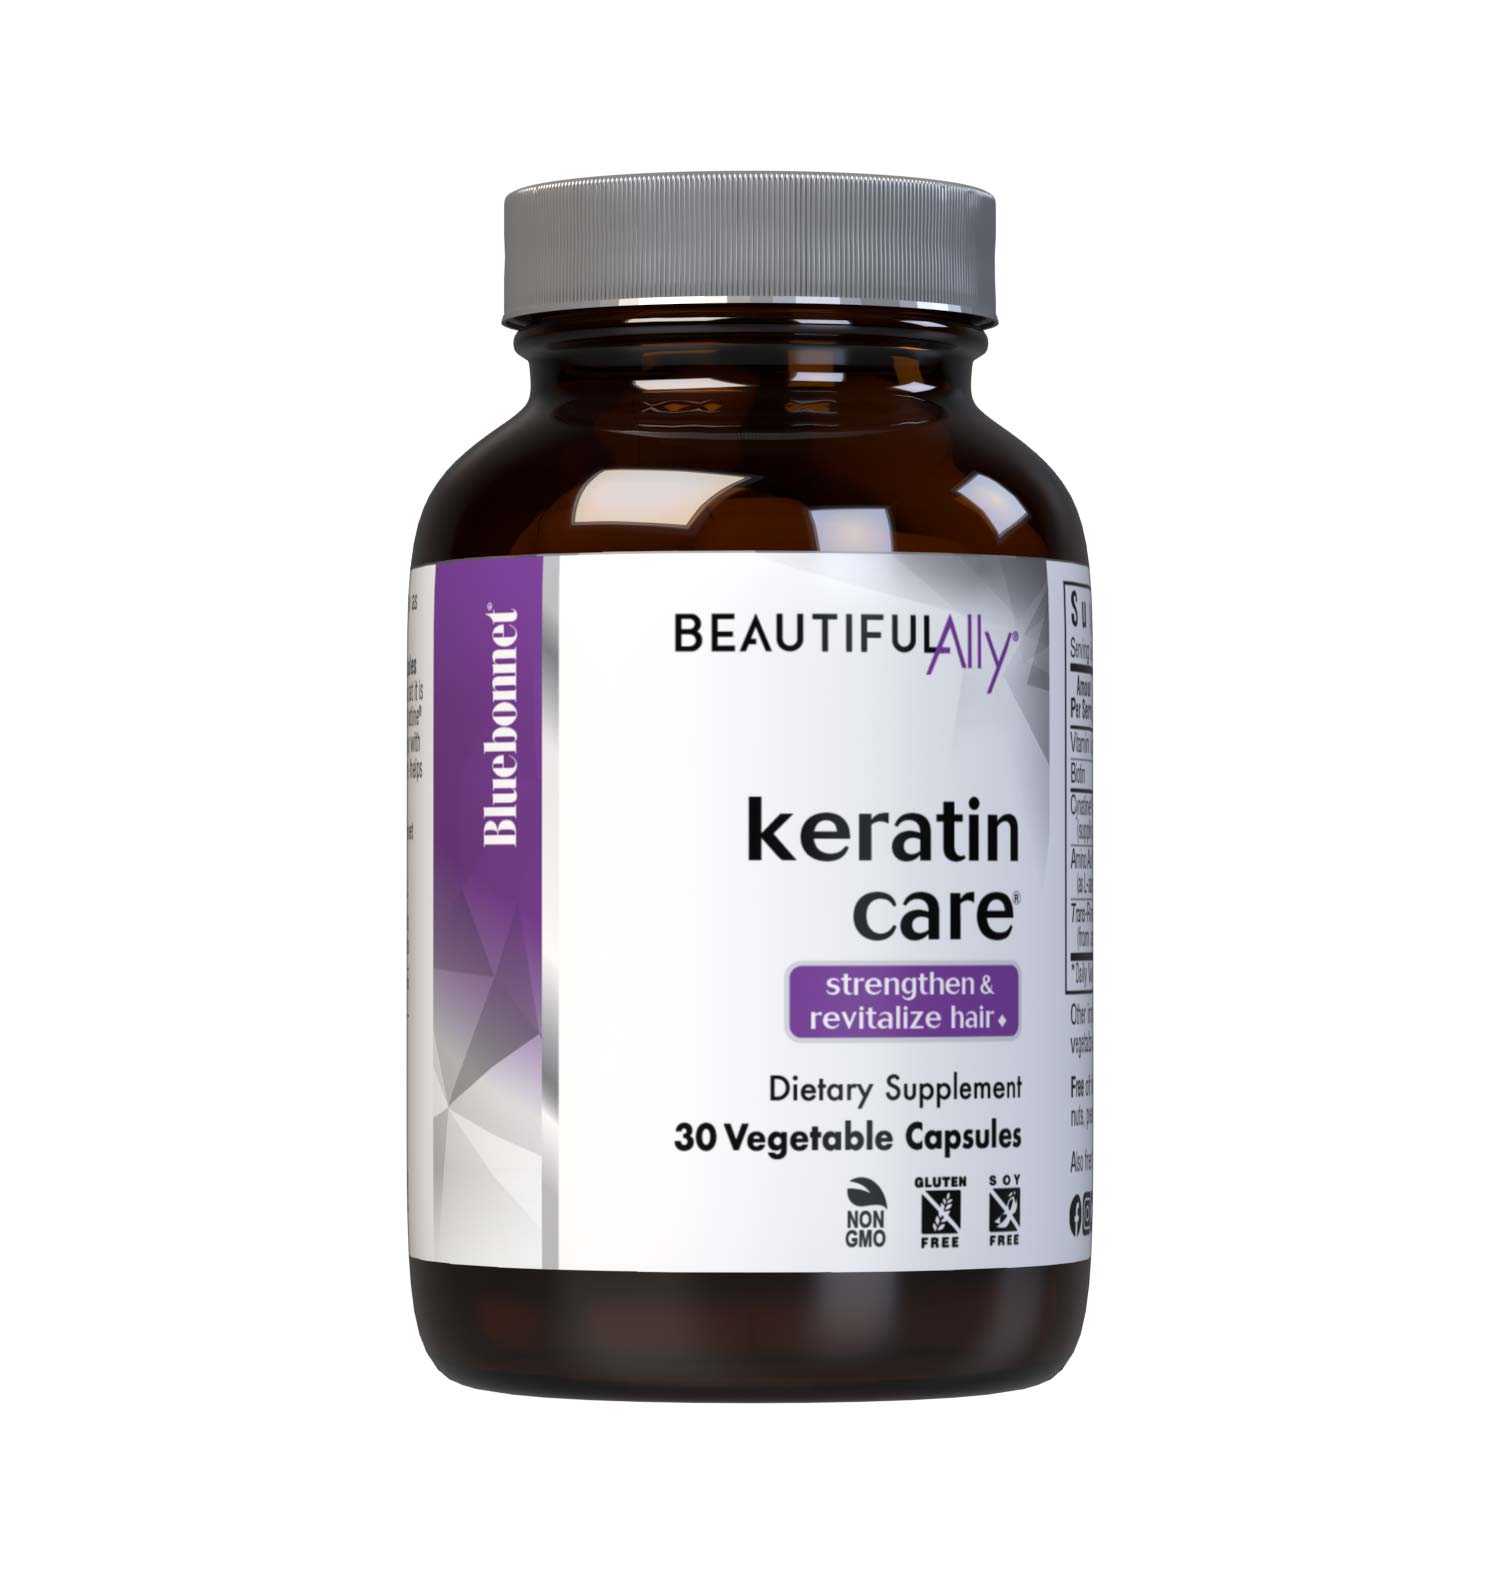 Bluebonnet’s Beautiful Ally Keratin Care 30 Vegetable Capsules are specially formulated with Cynatine HNS, a clinically-studied, bioactive, solubilized keratin – along with biotin, resveratrol, vitamin A and a unique amino acid blend – to help promote the appearance of strong, gorgeous hair. This restorative hair care formula helps protect and repair damaged hair from the inside out. #size_30 count